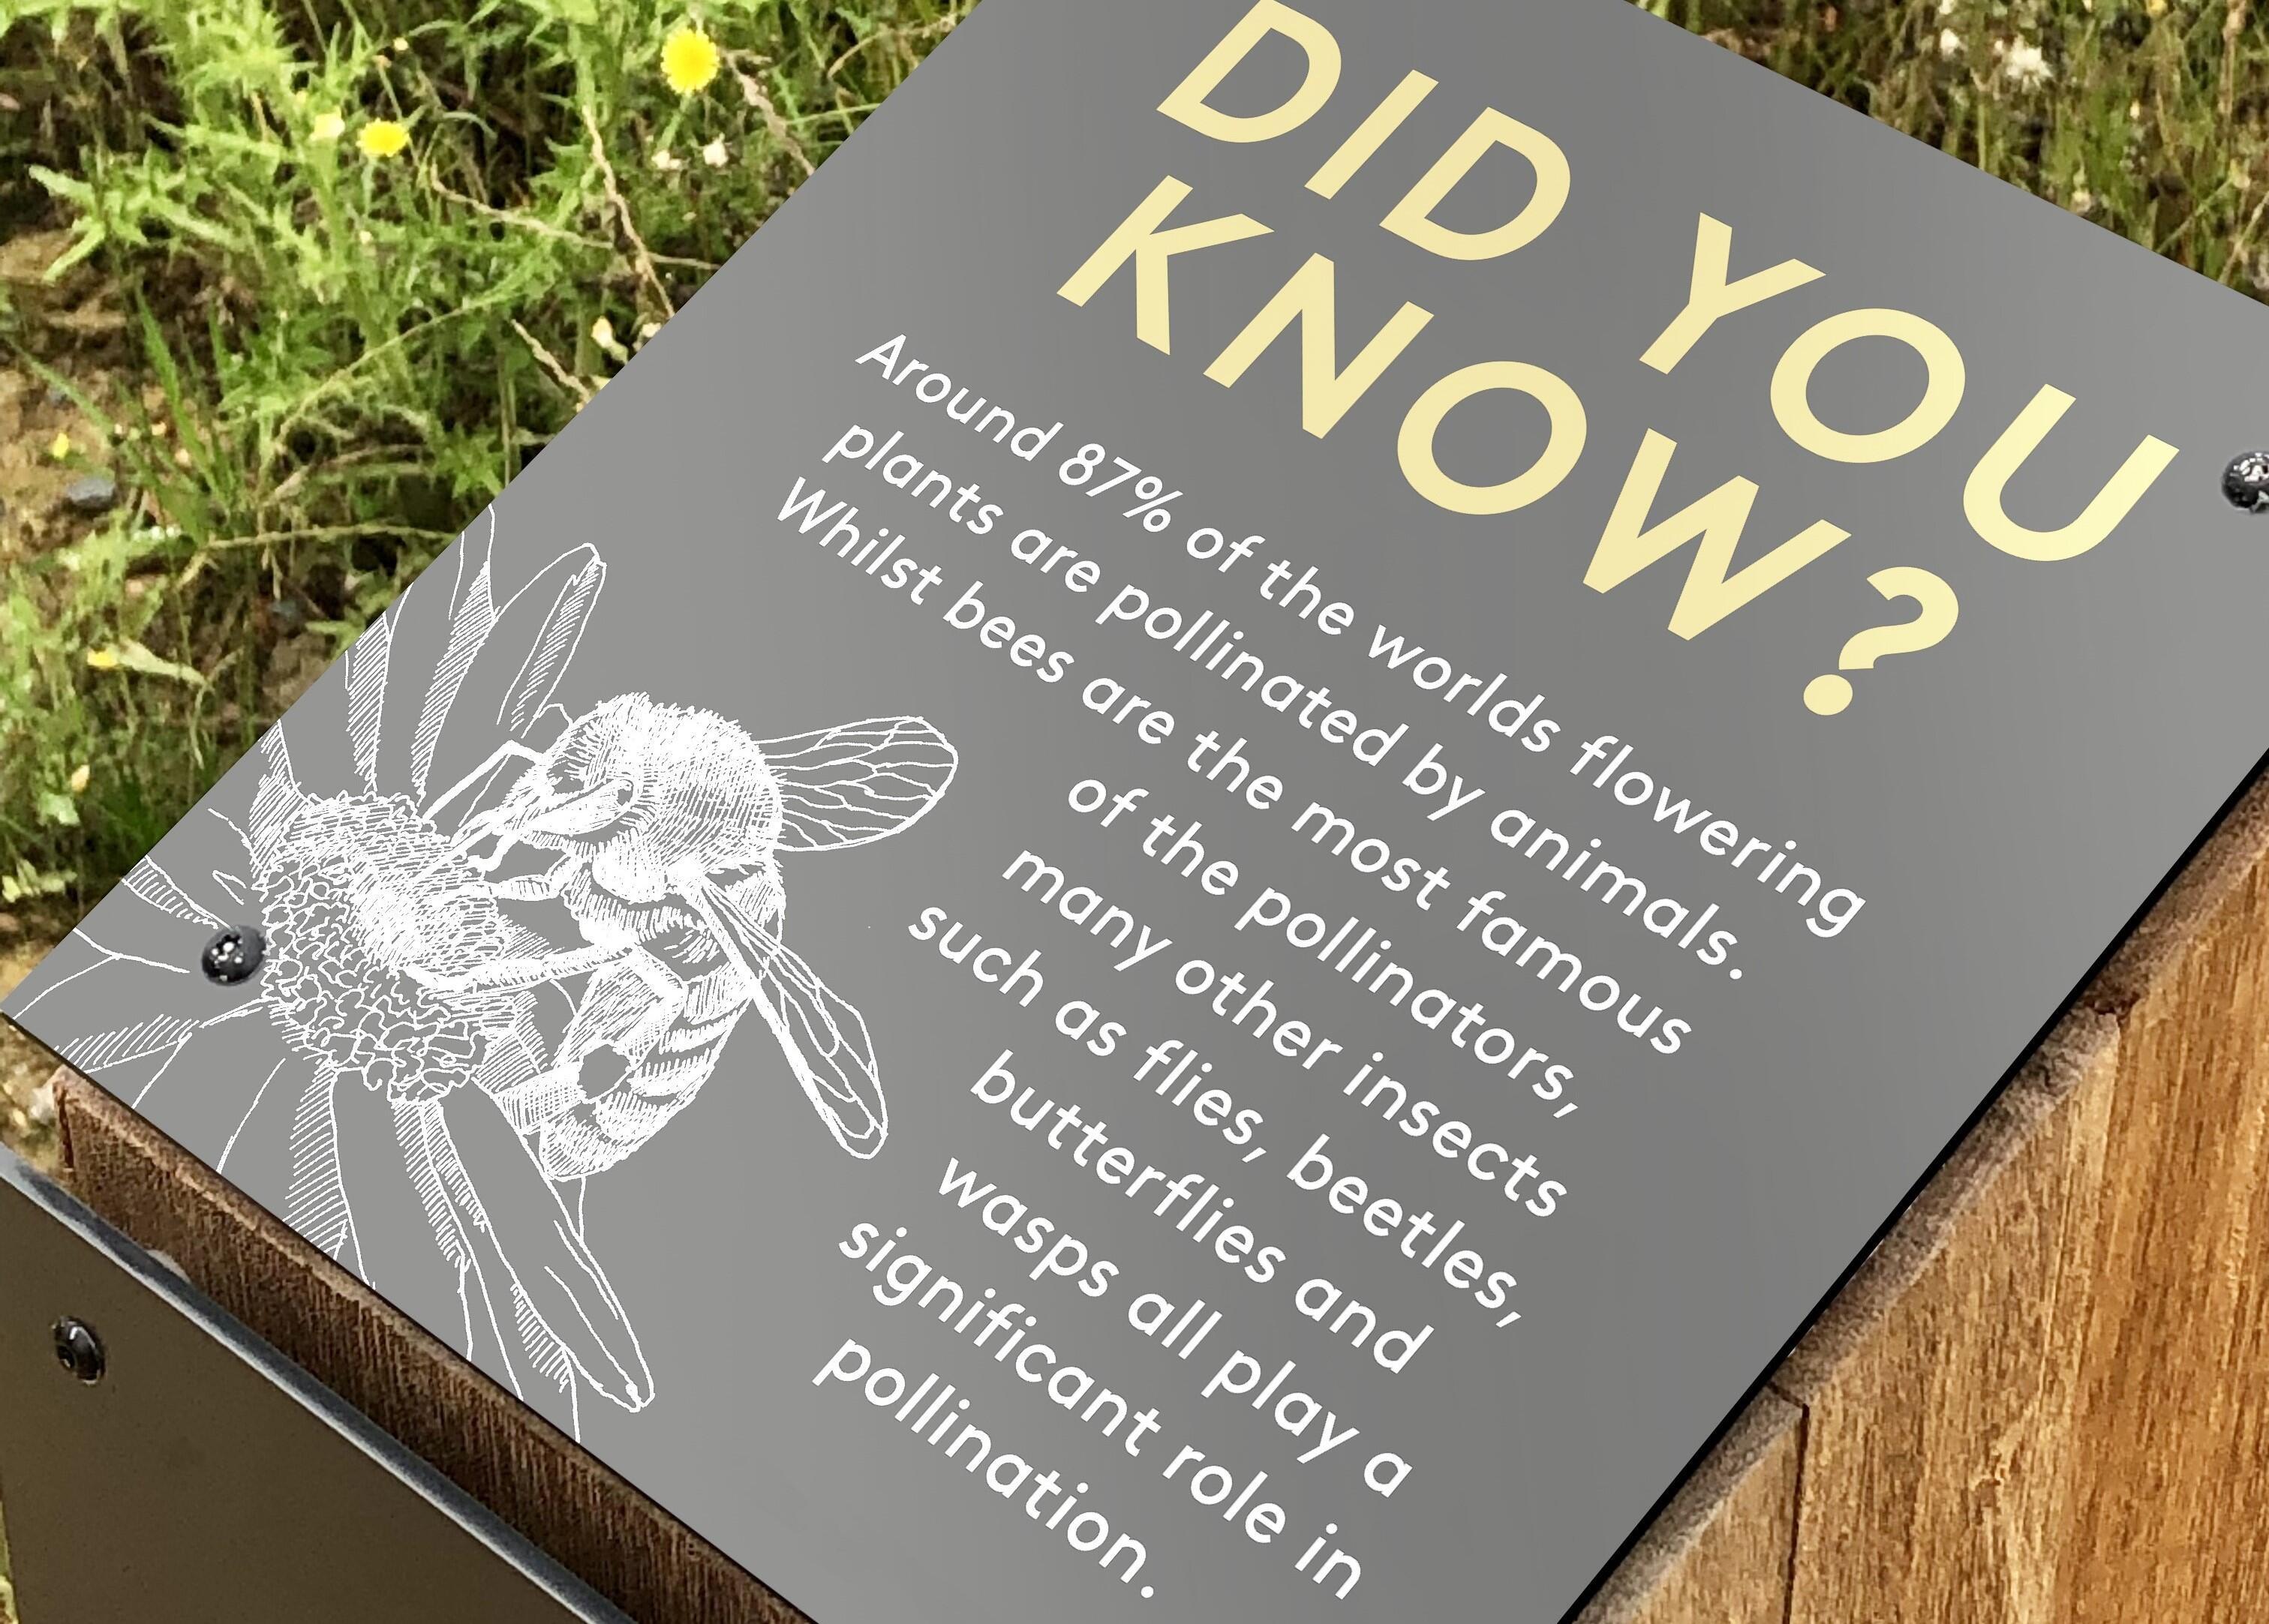 A sign at Houlton saying 'did you know?' followed by 'Around 87% of the worlds flowering plants are pollinated by animals. Whilst bees are the most famous of the pollinators, many other insects such as flies, beetles and butterflies help' 